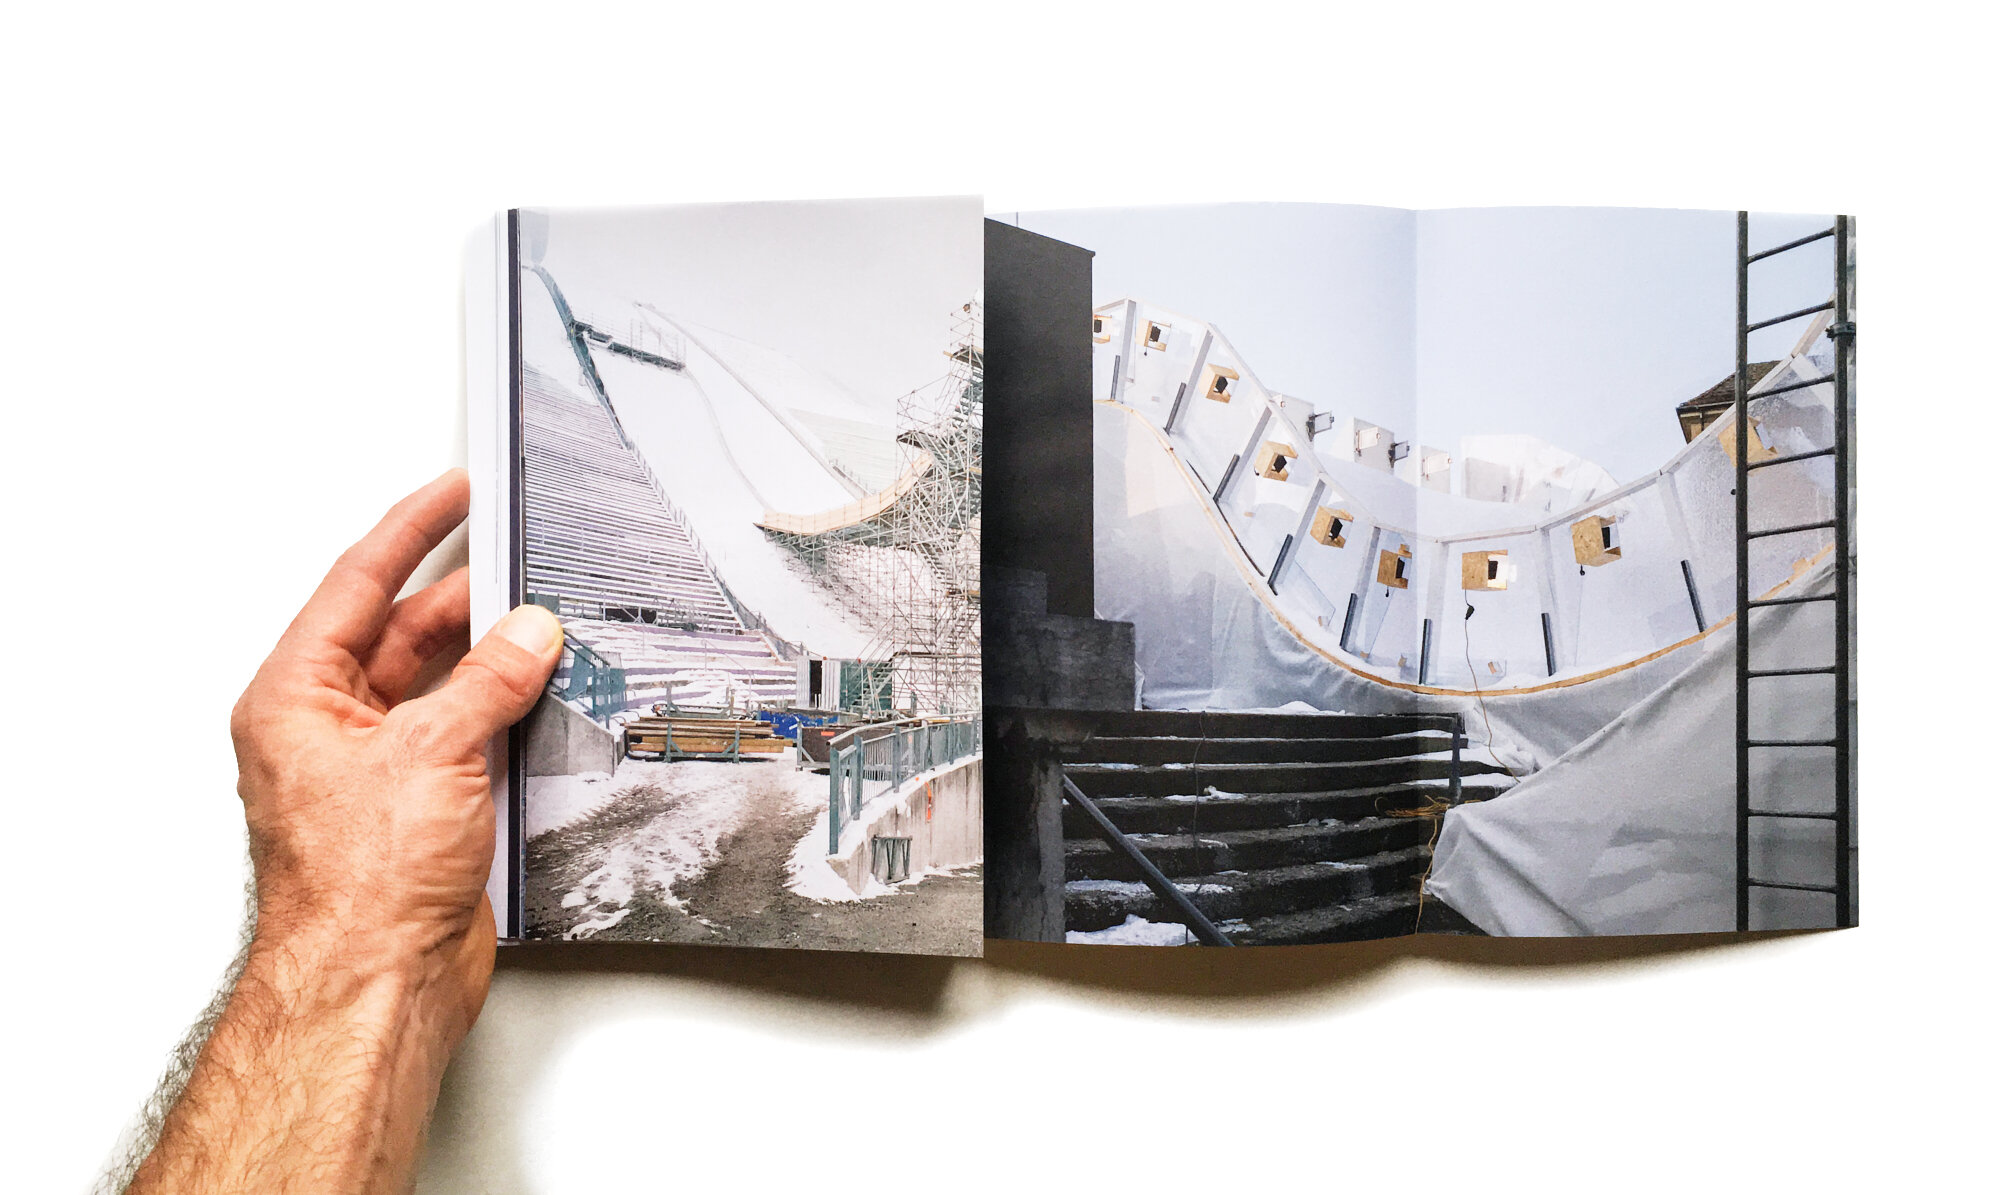  a selection from the Archtiecture of spectacle was featured in King’s Review ‘extremes’ edition 